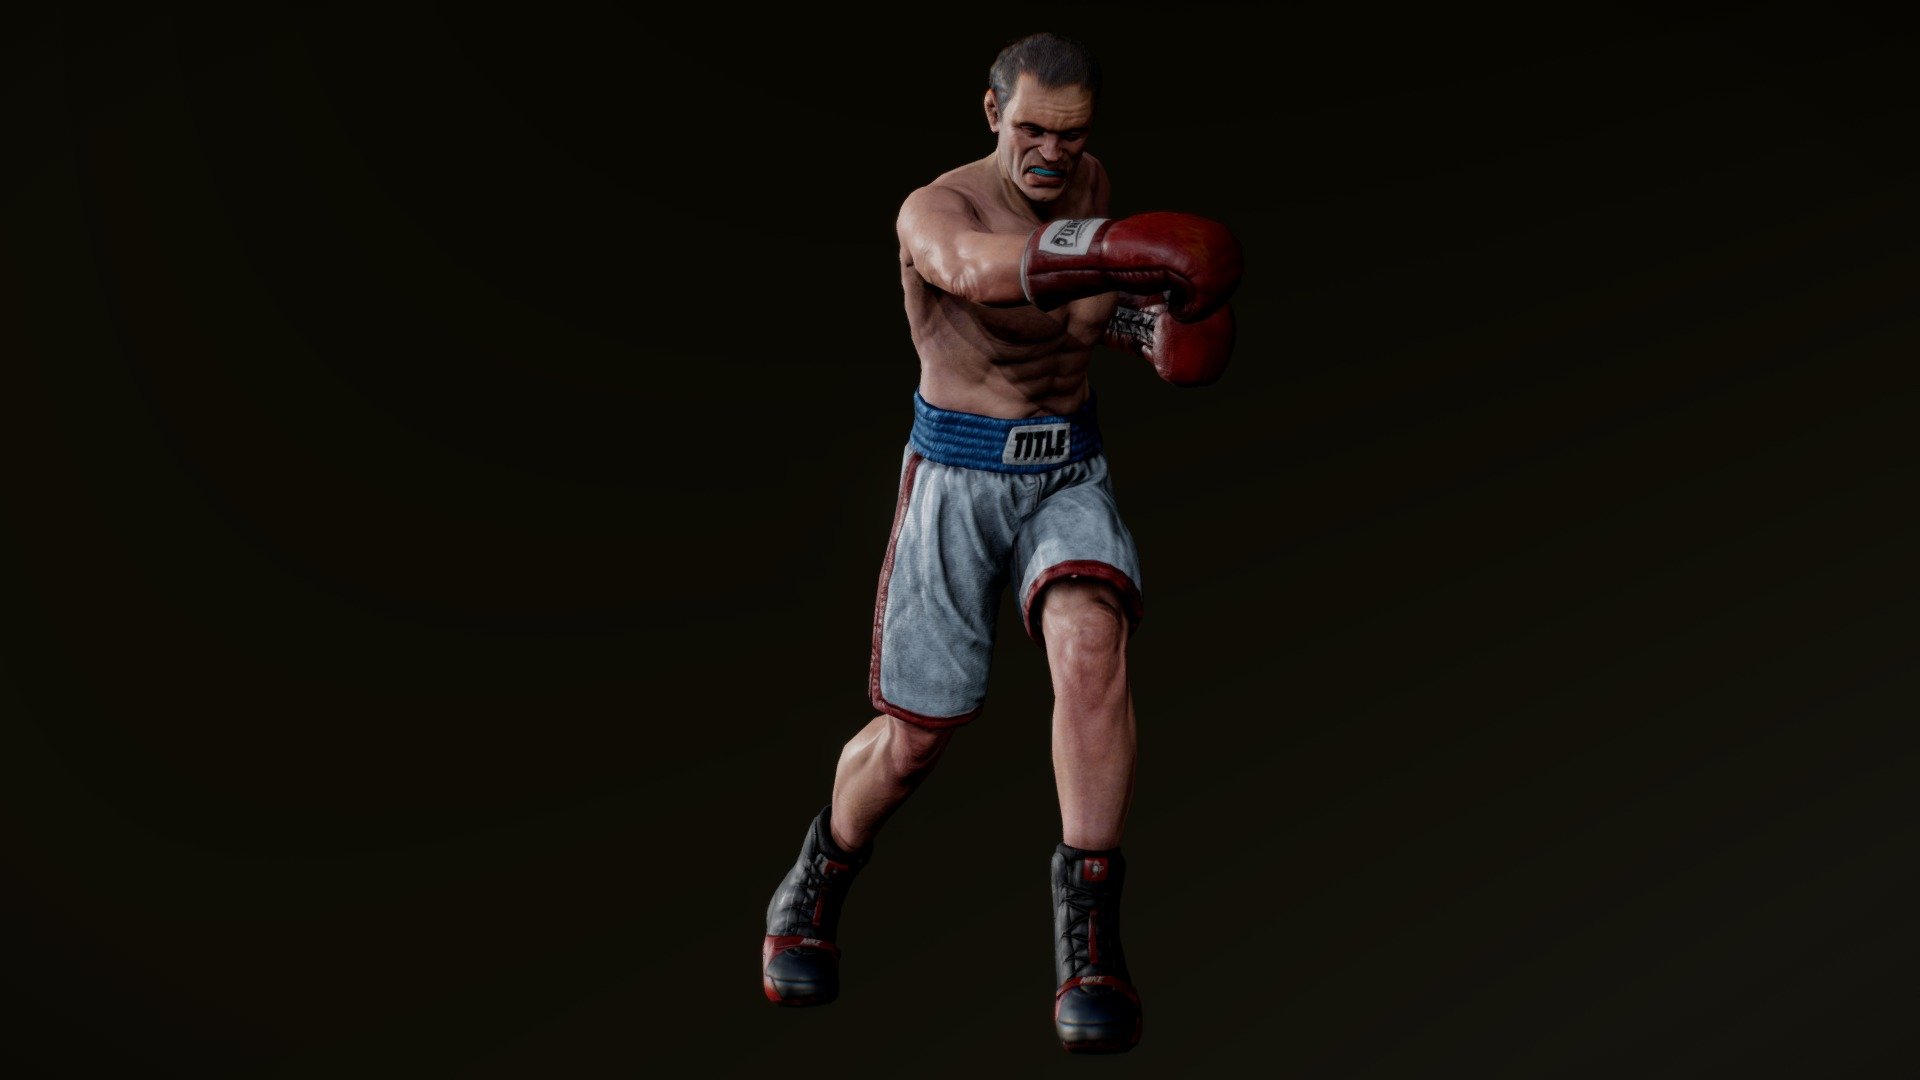 I tried to add a lot of detail on the face and clothing, making custom logos, titles and names to give it a unique look. So feel free to take a closer look and maybe find details you didn't notice before. 
I had to modify the models slightly in order to upload them so excuse any potential hiccups 3d model